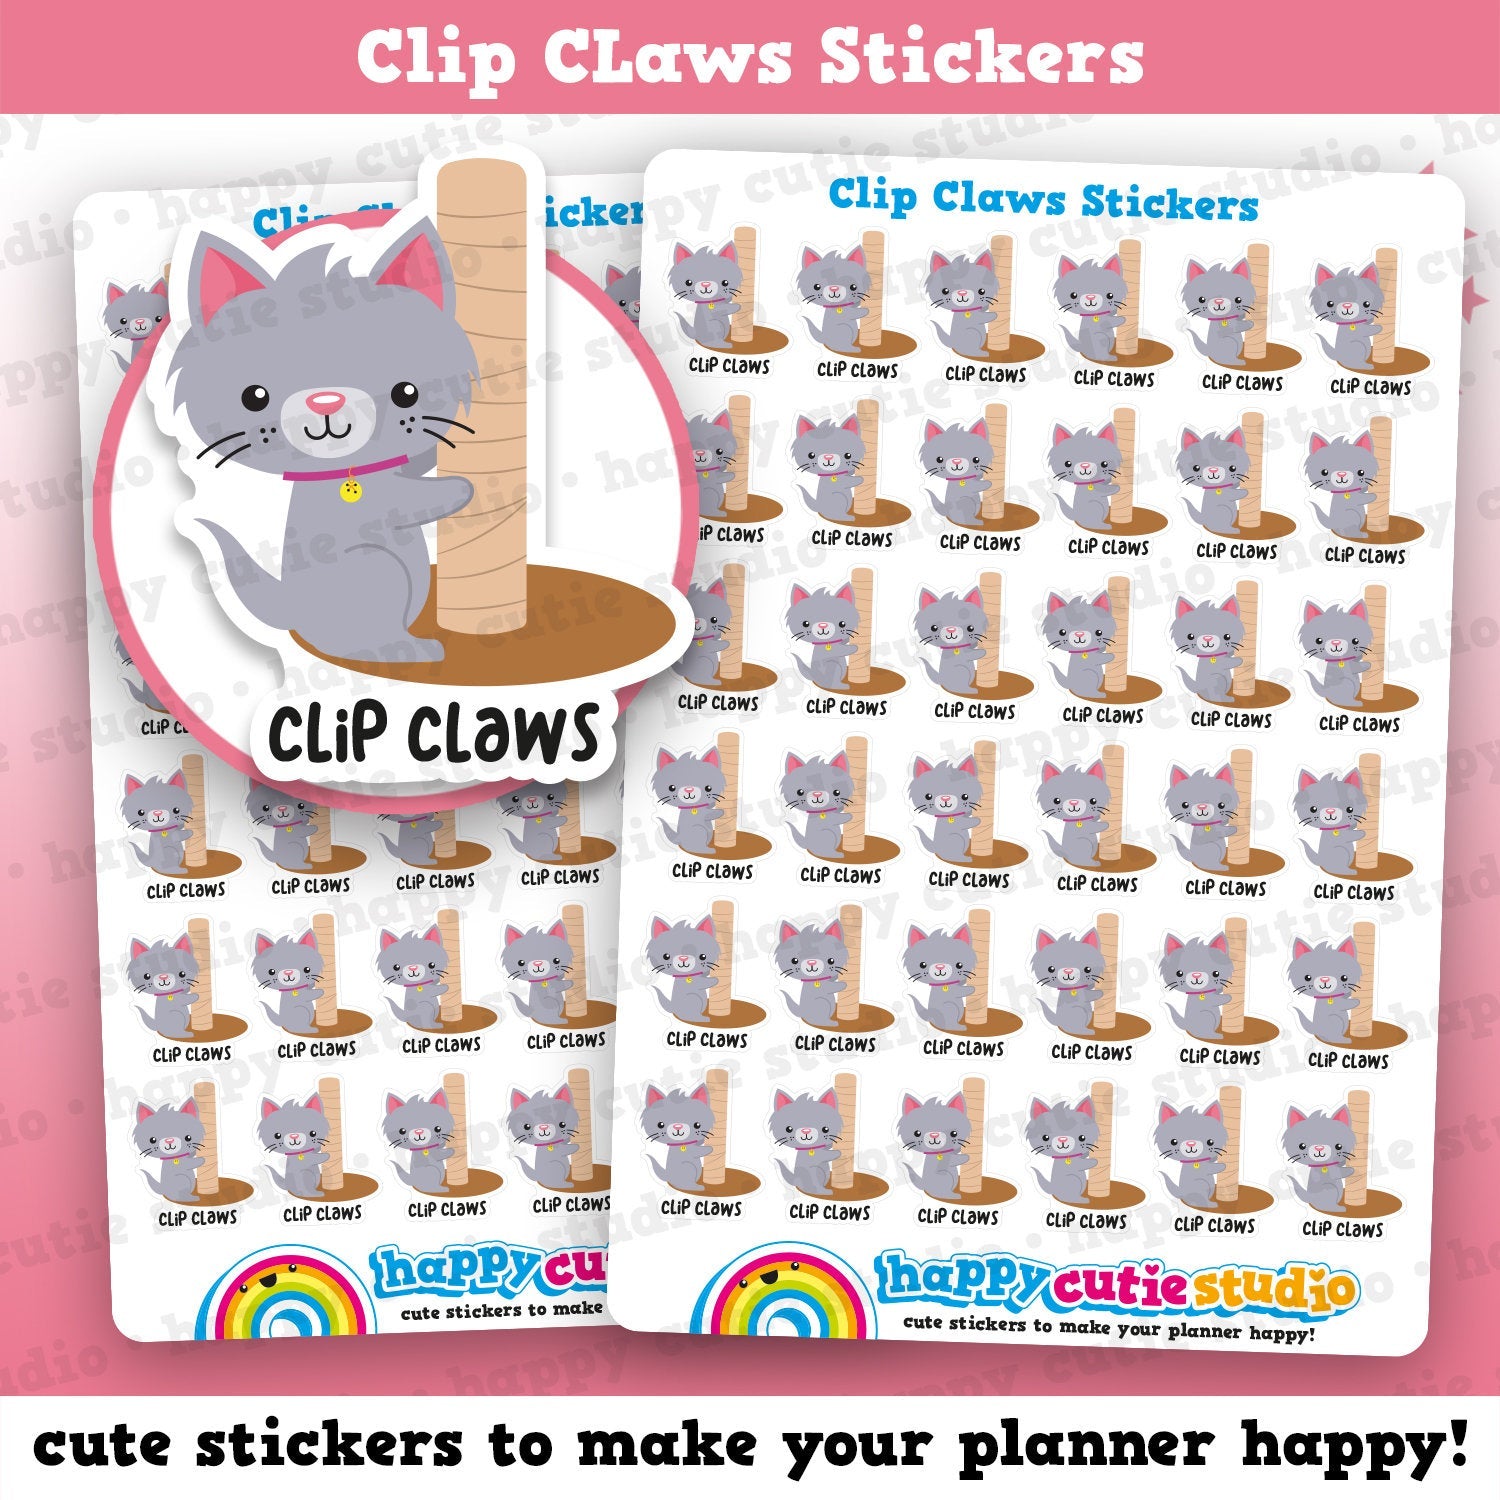 36 Cute Clip Claws Cat Care/Vet Planner Stickers